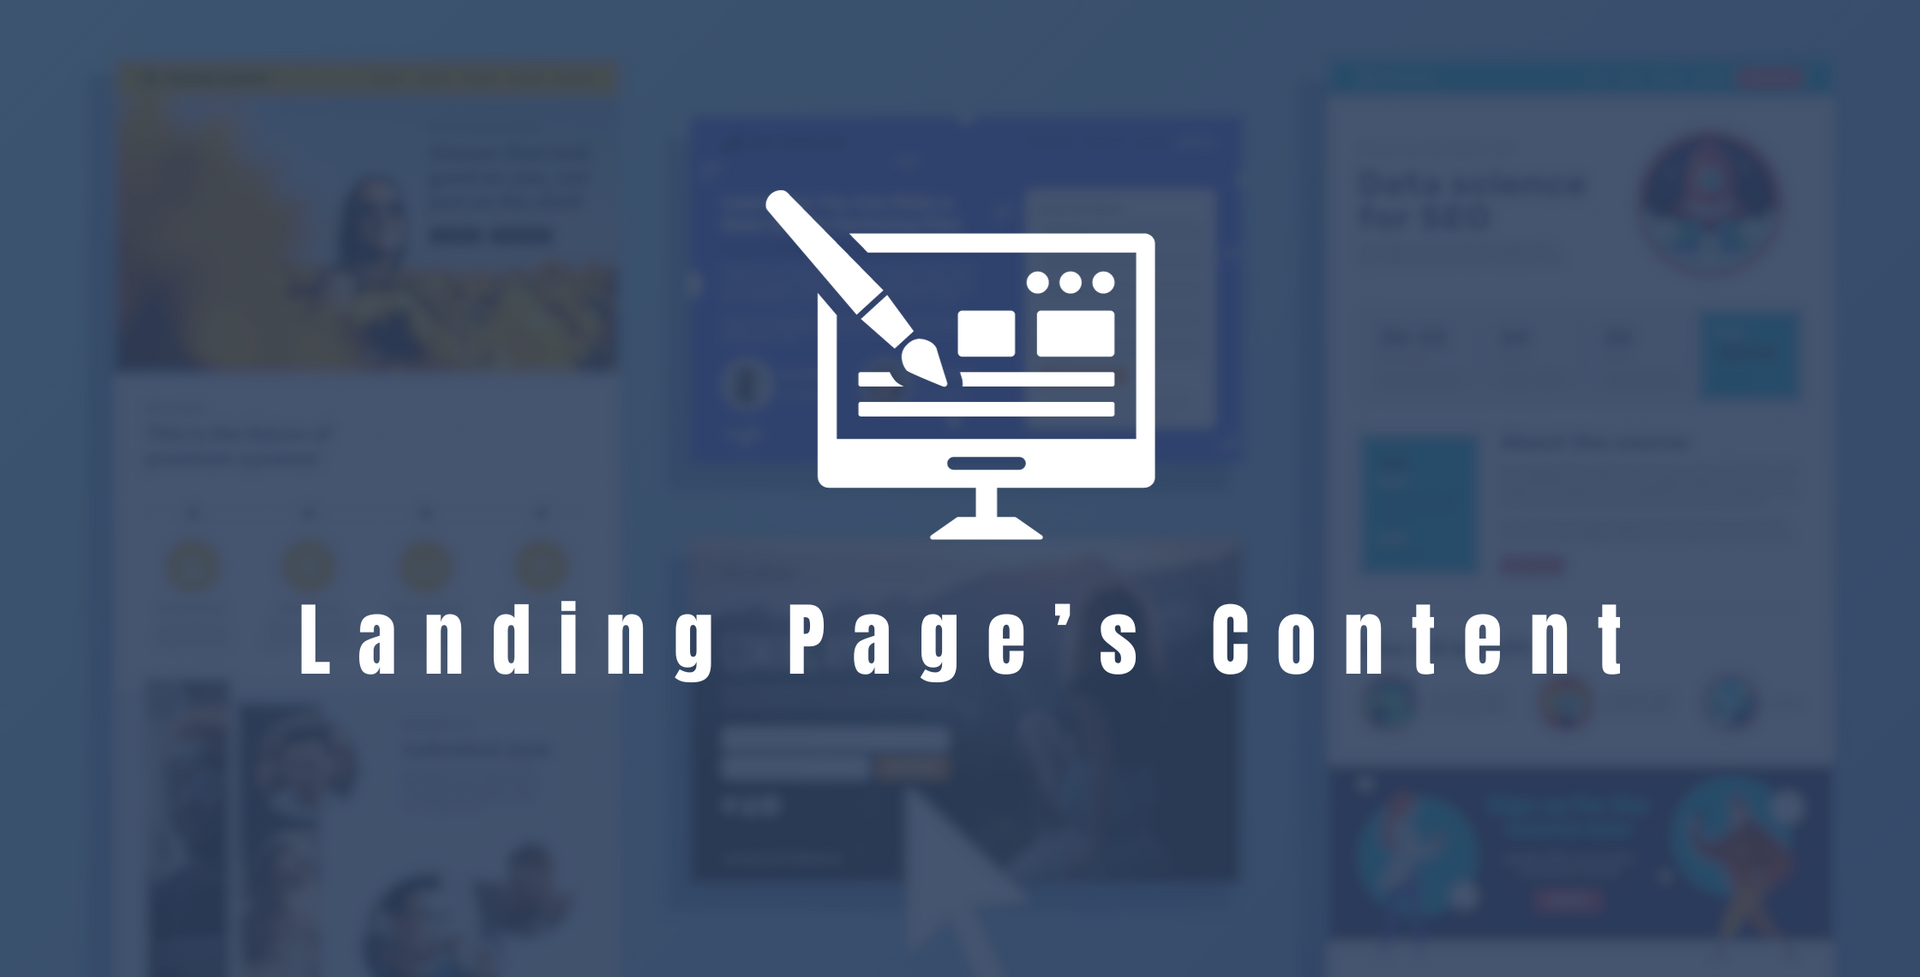 Landing Page’s Content